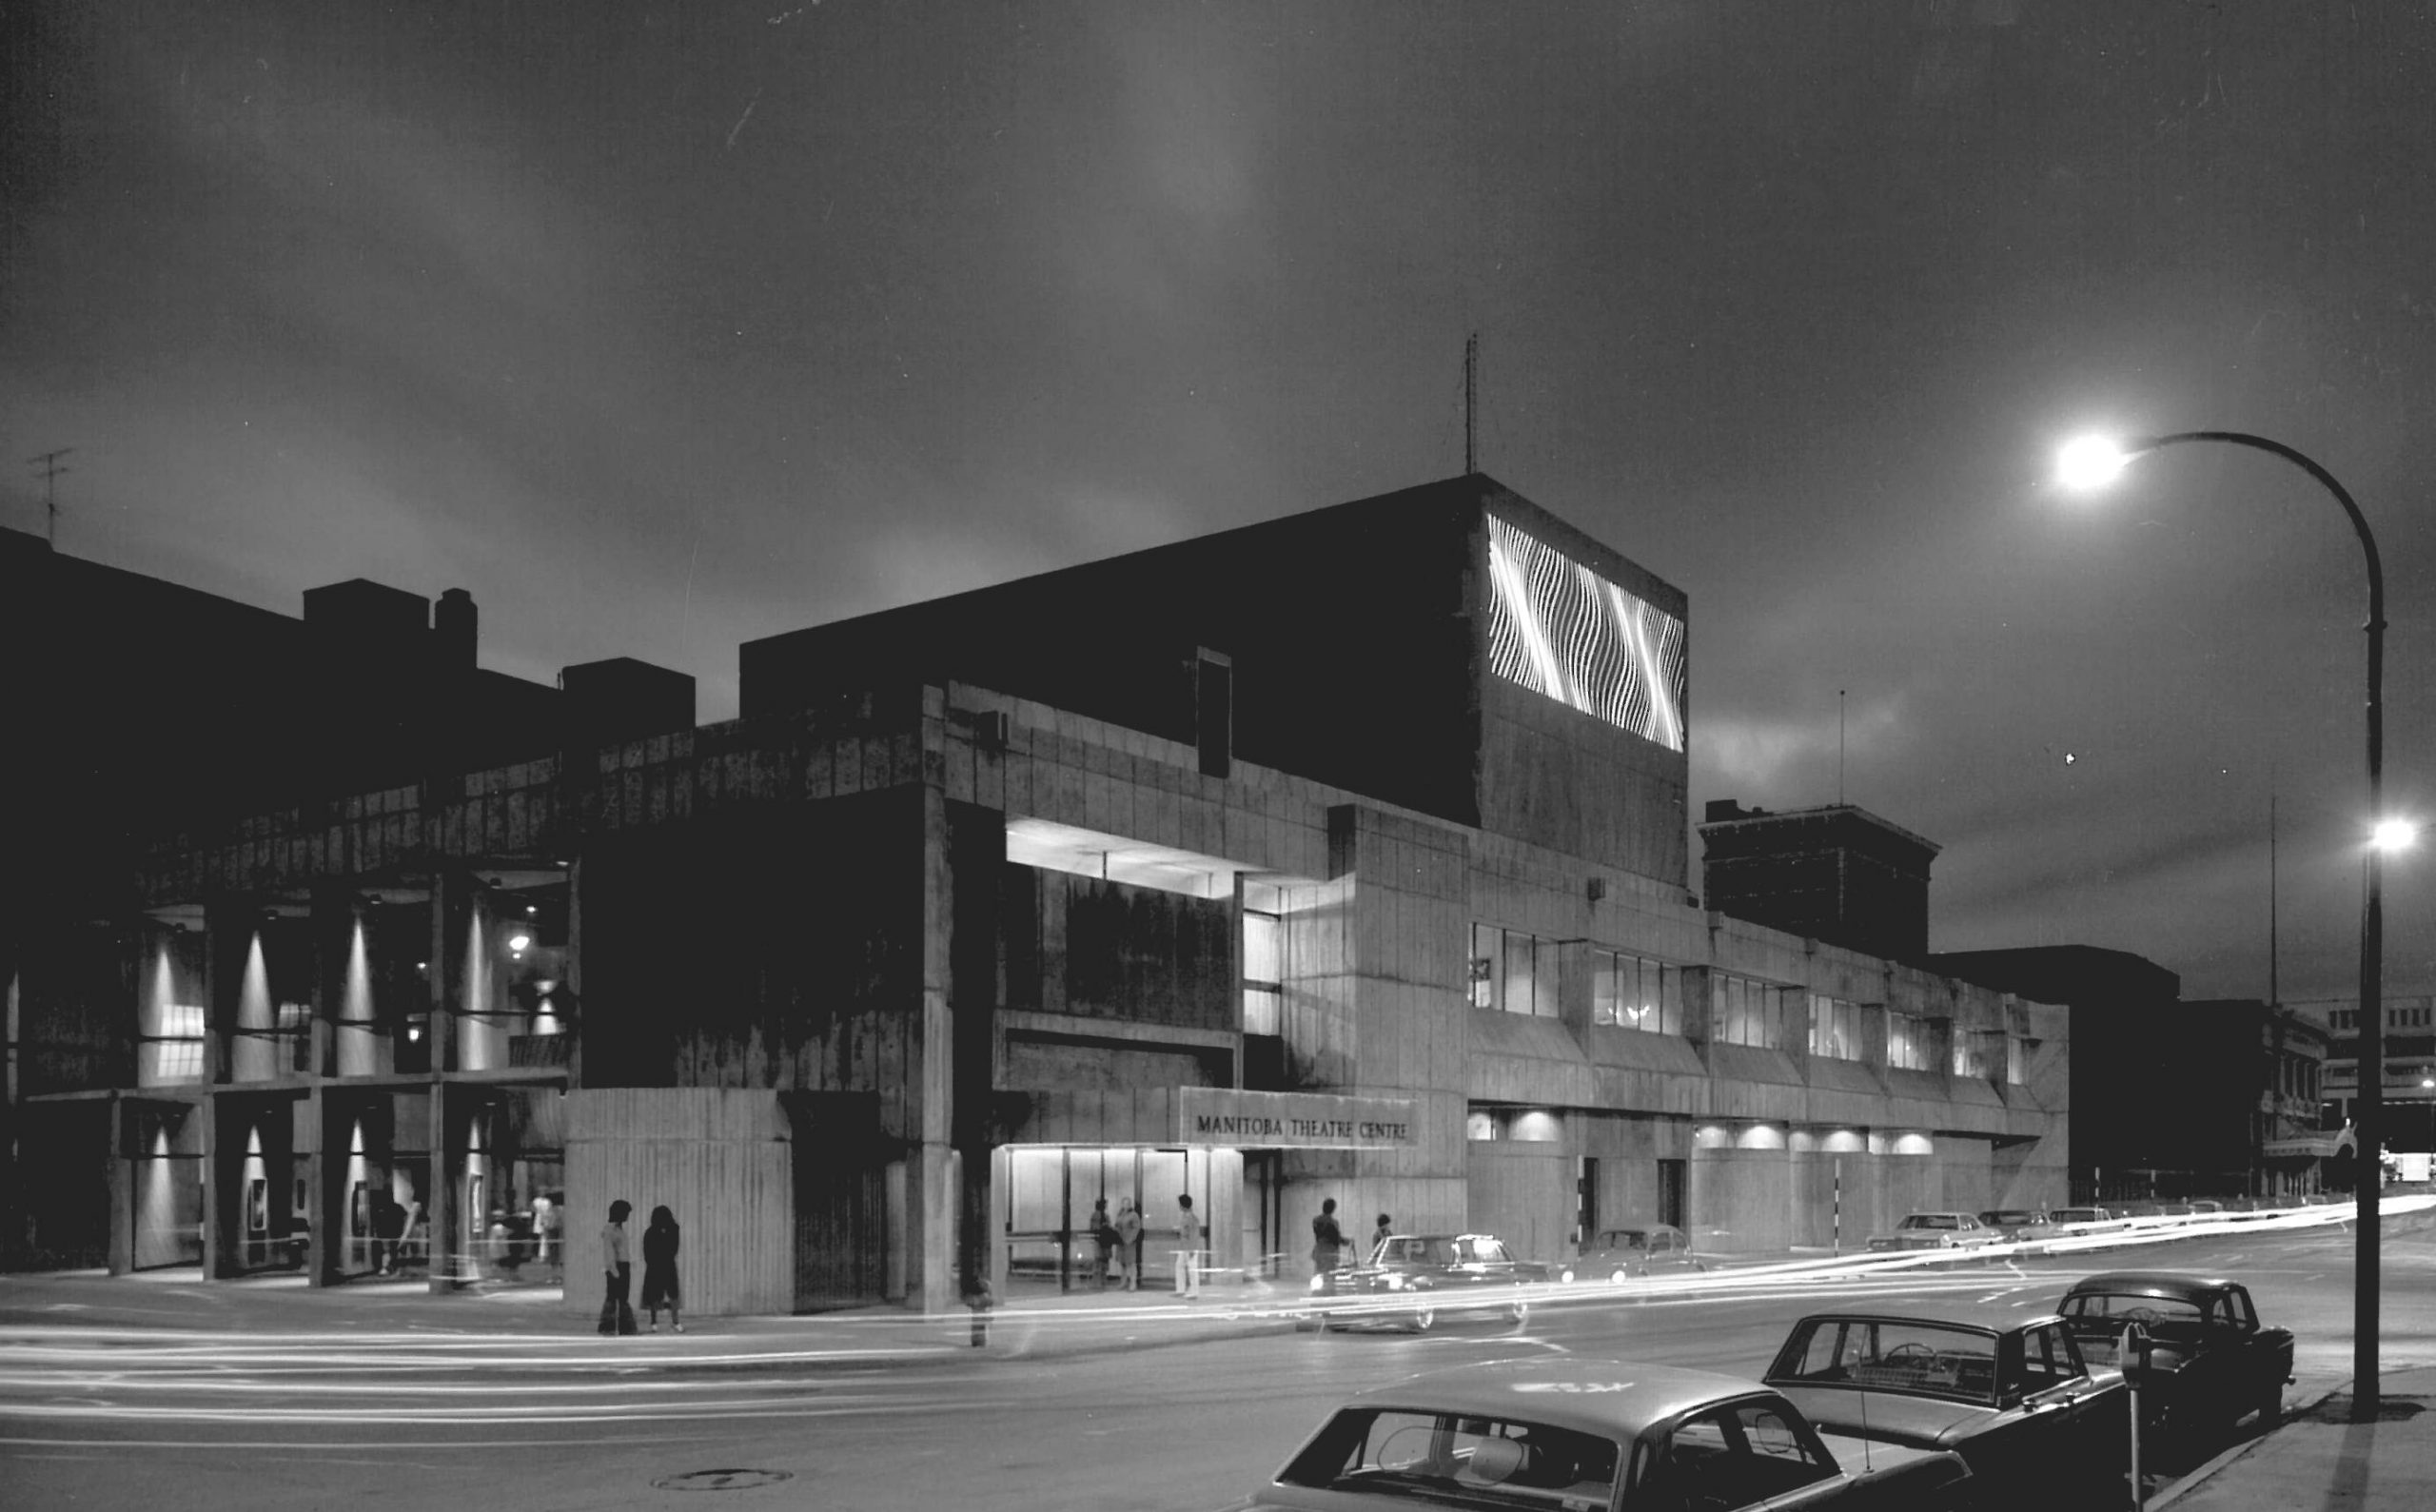 Black and white image of the exterior of RMTC